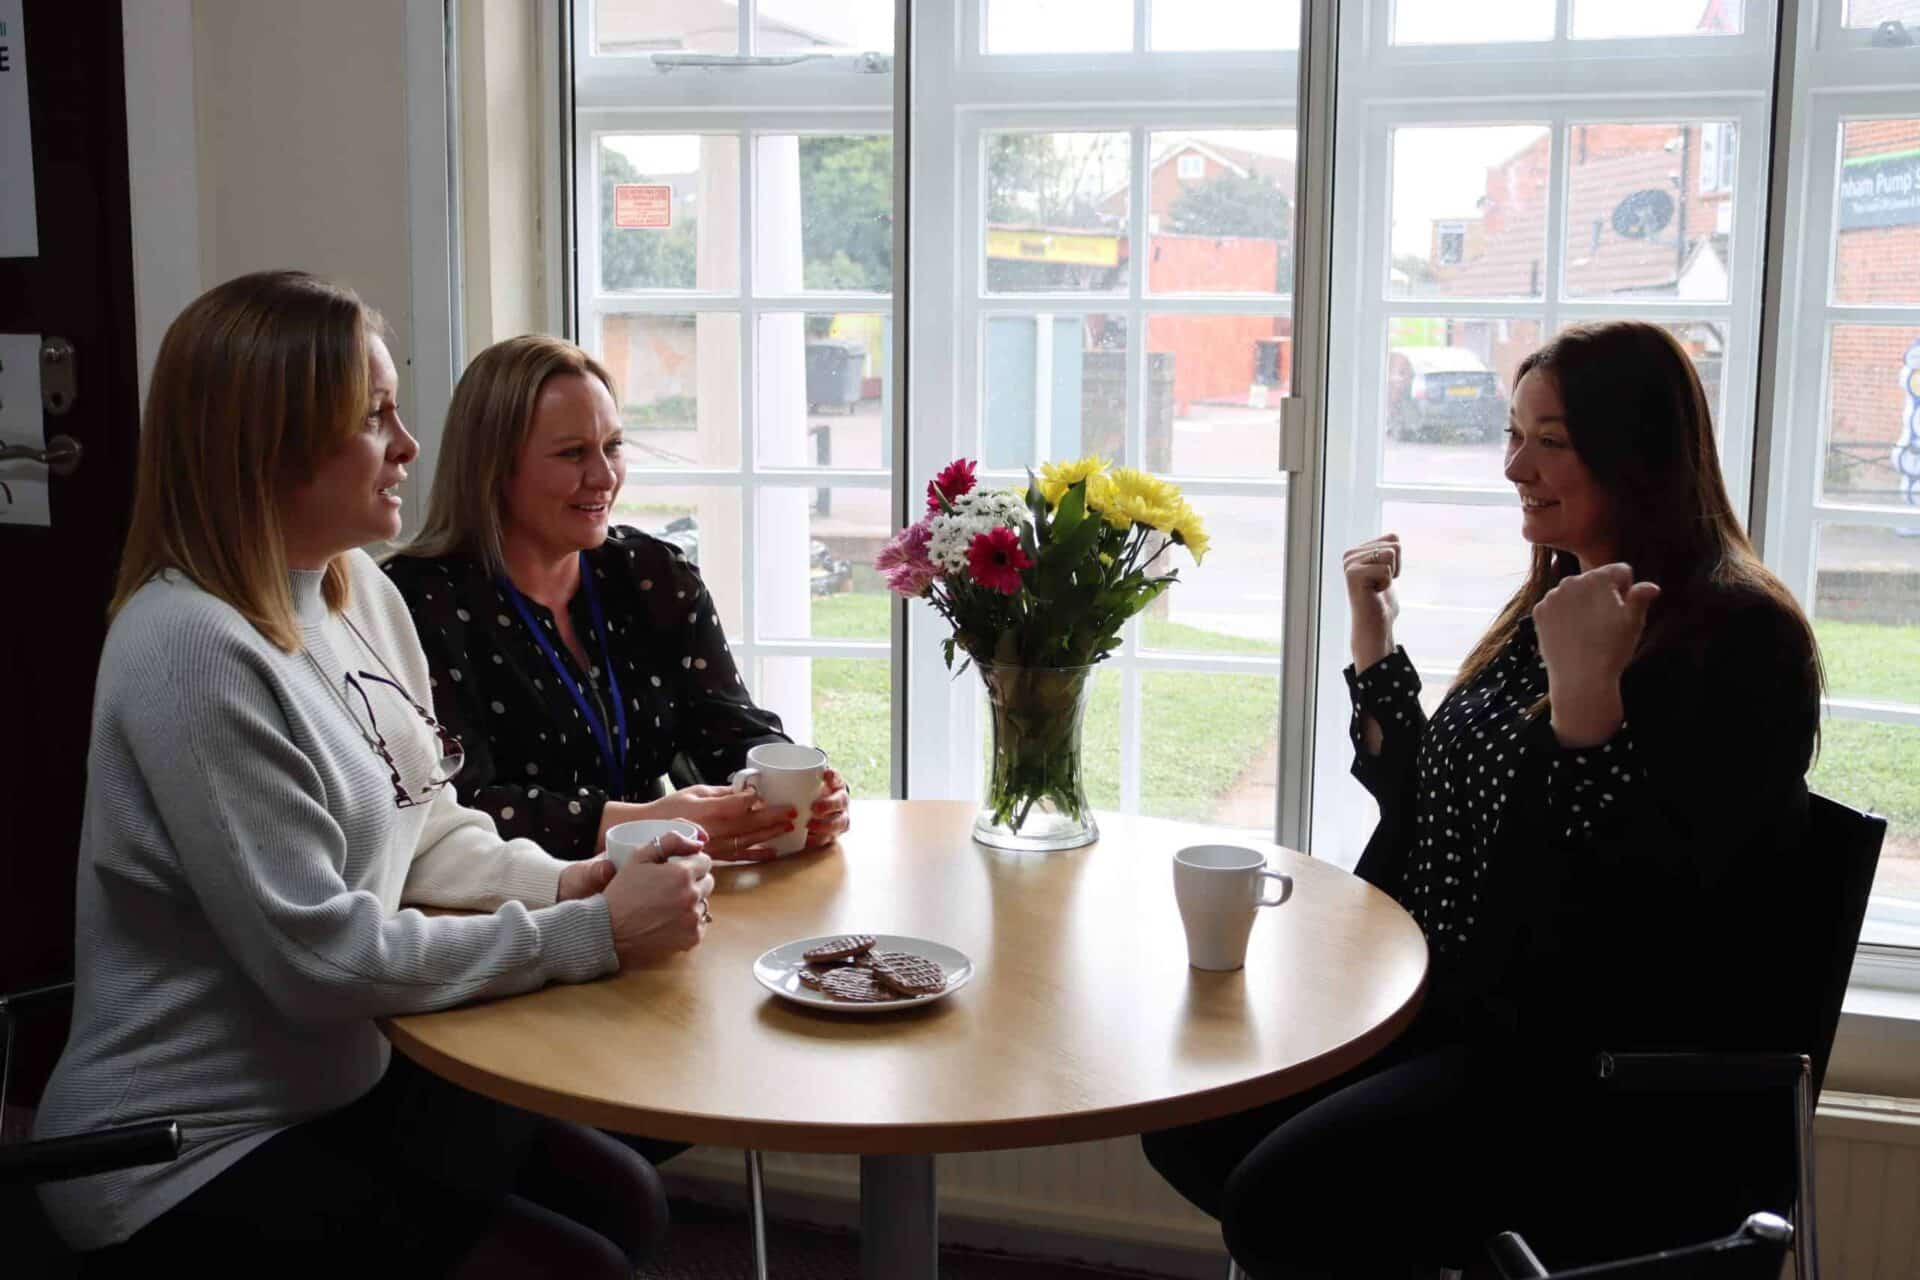 Three women sharing a pleasant conversation over coffee at a round table with a vase of fresh flowers in the centre.